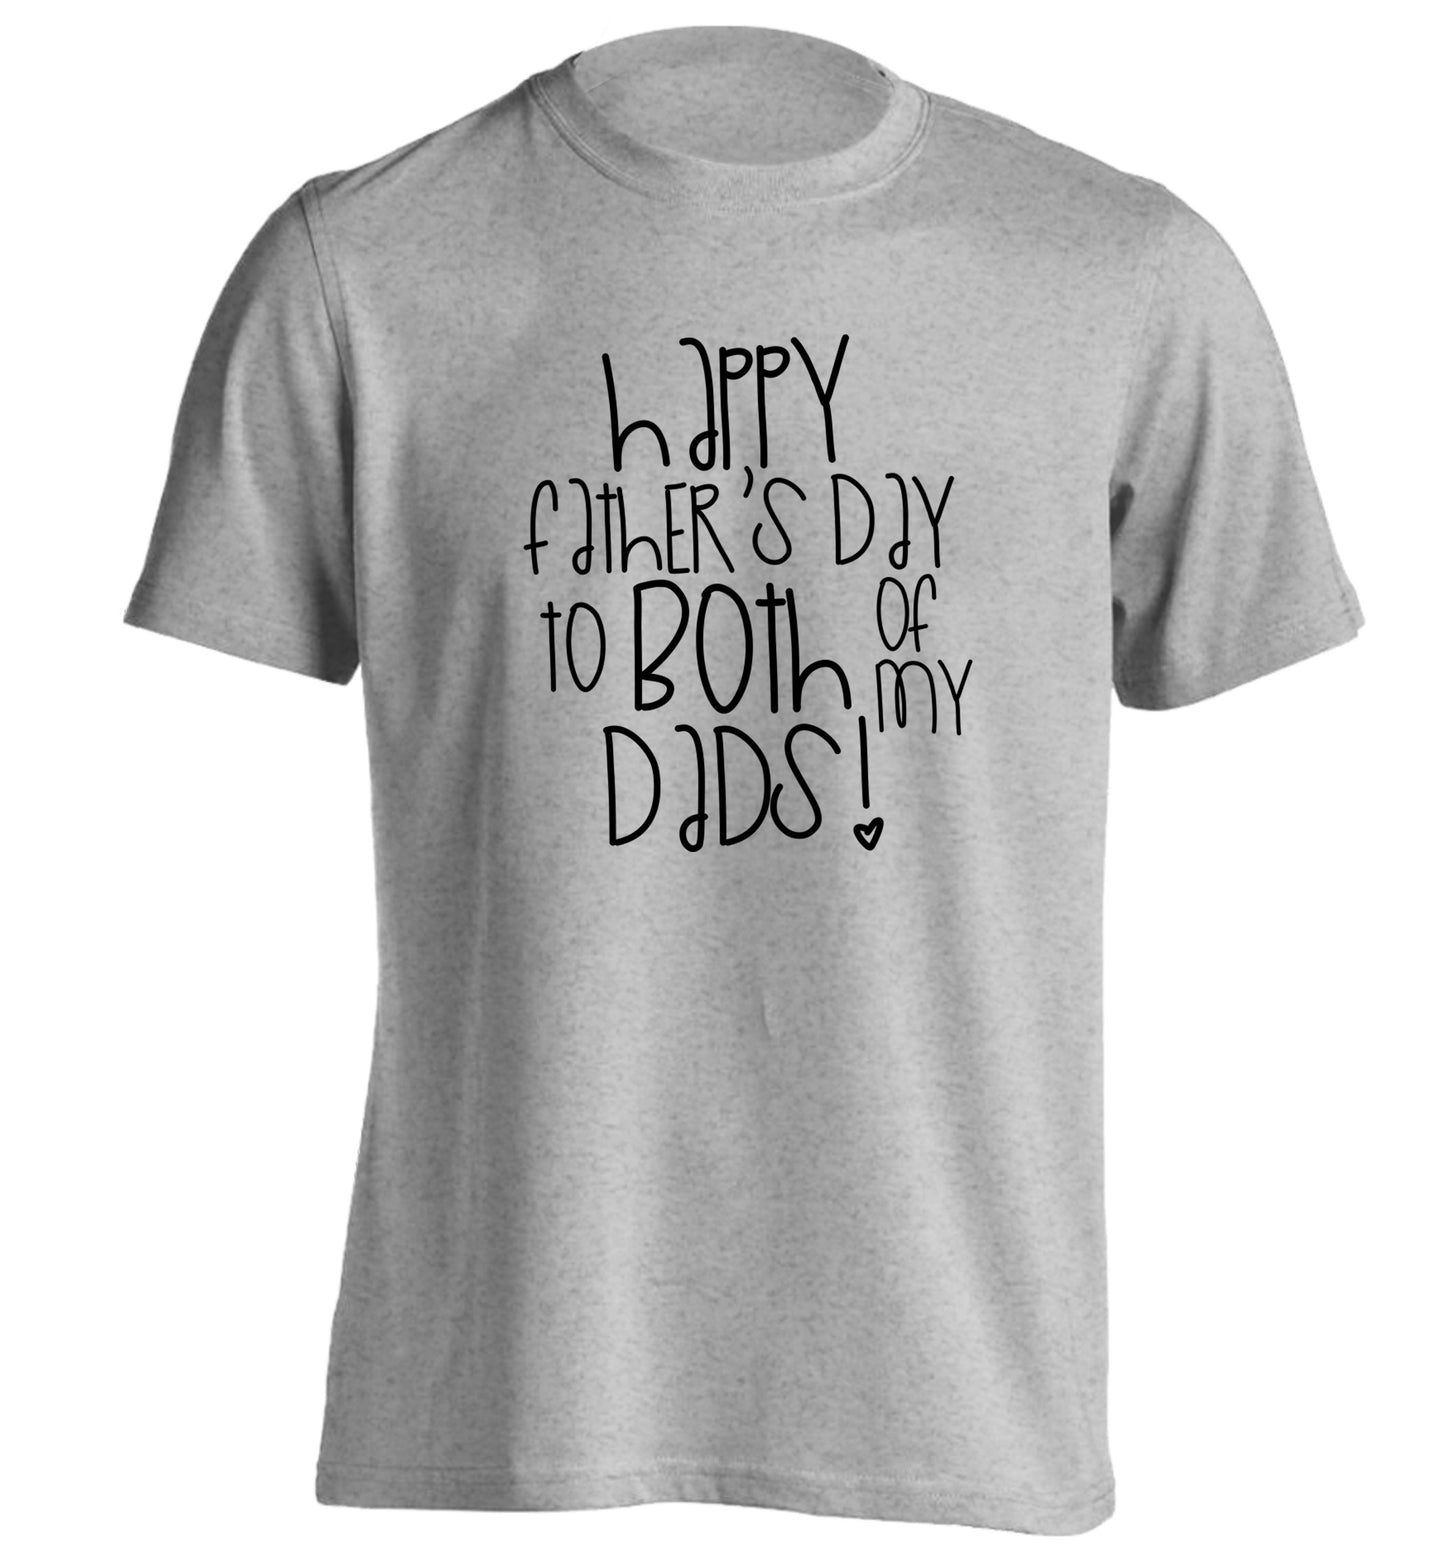 Happy father's day to both of my dads adults unisex grey Tshirt 2XL